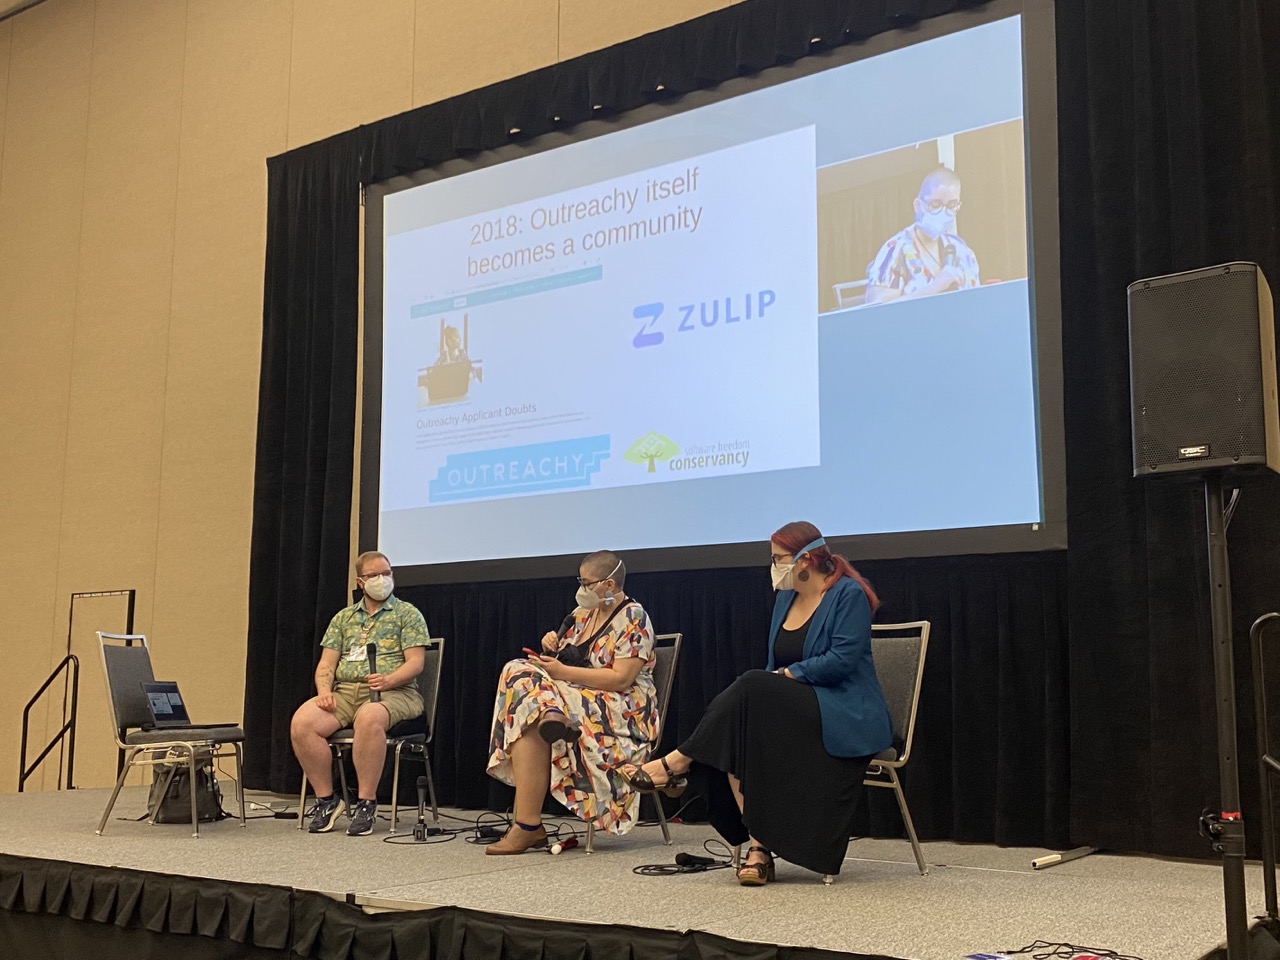 Sage, Karen, and I share the stage to talk about Outreachy. In this photo, I’m in the middle seat, holding a microphone and talking about how community understood itself as a community.